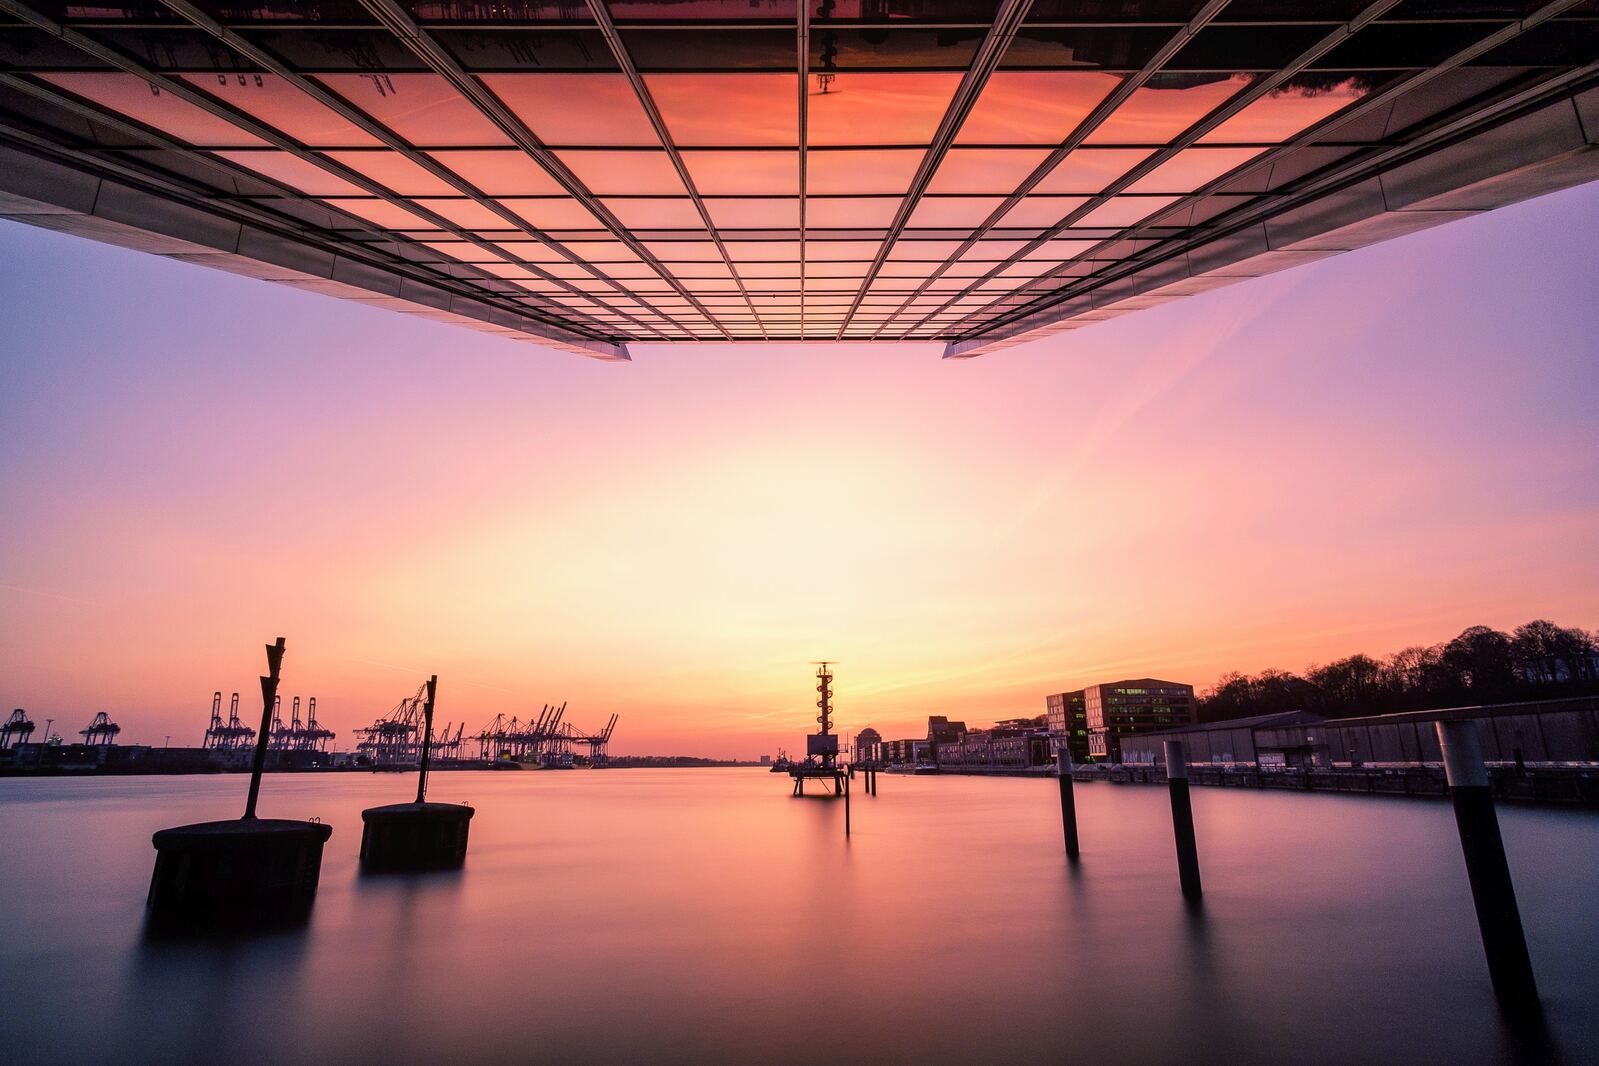 Image of Dockland Building by Team PhotoHound